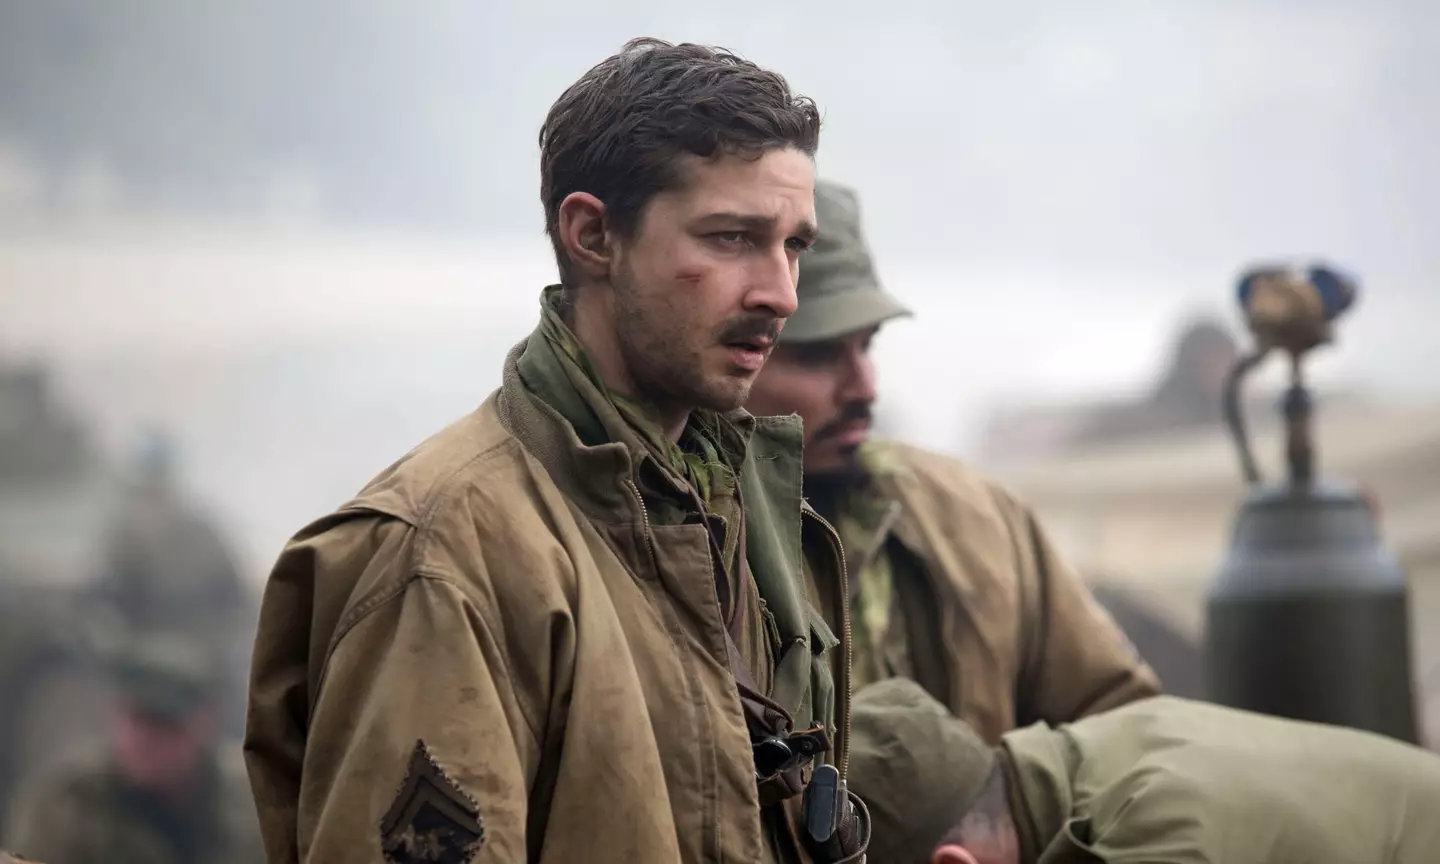 Shia LaBeouf on the set of Fury, where Brad Pitt had to step in and defuse an incident involving the actor.